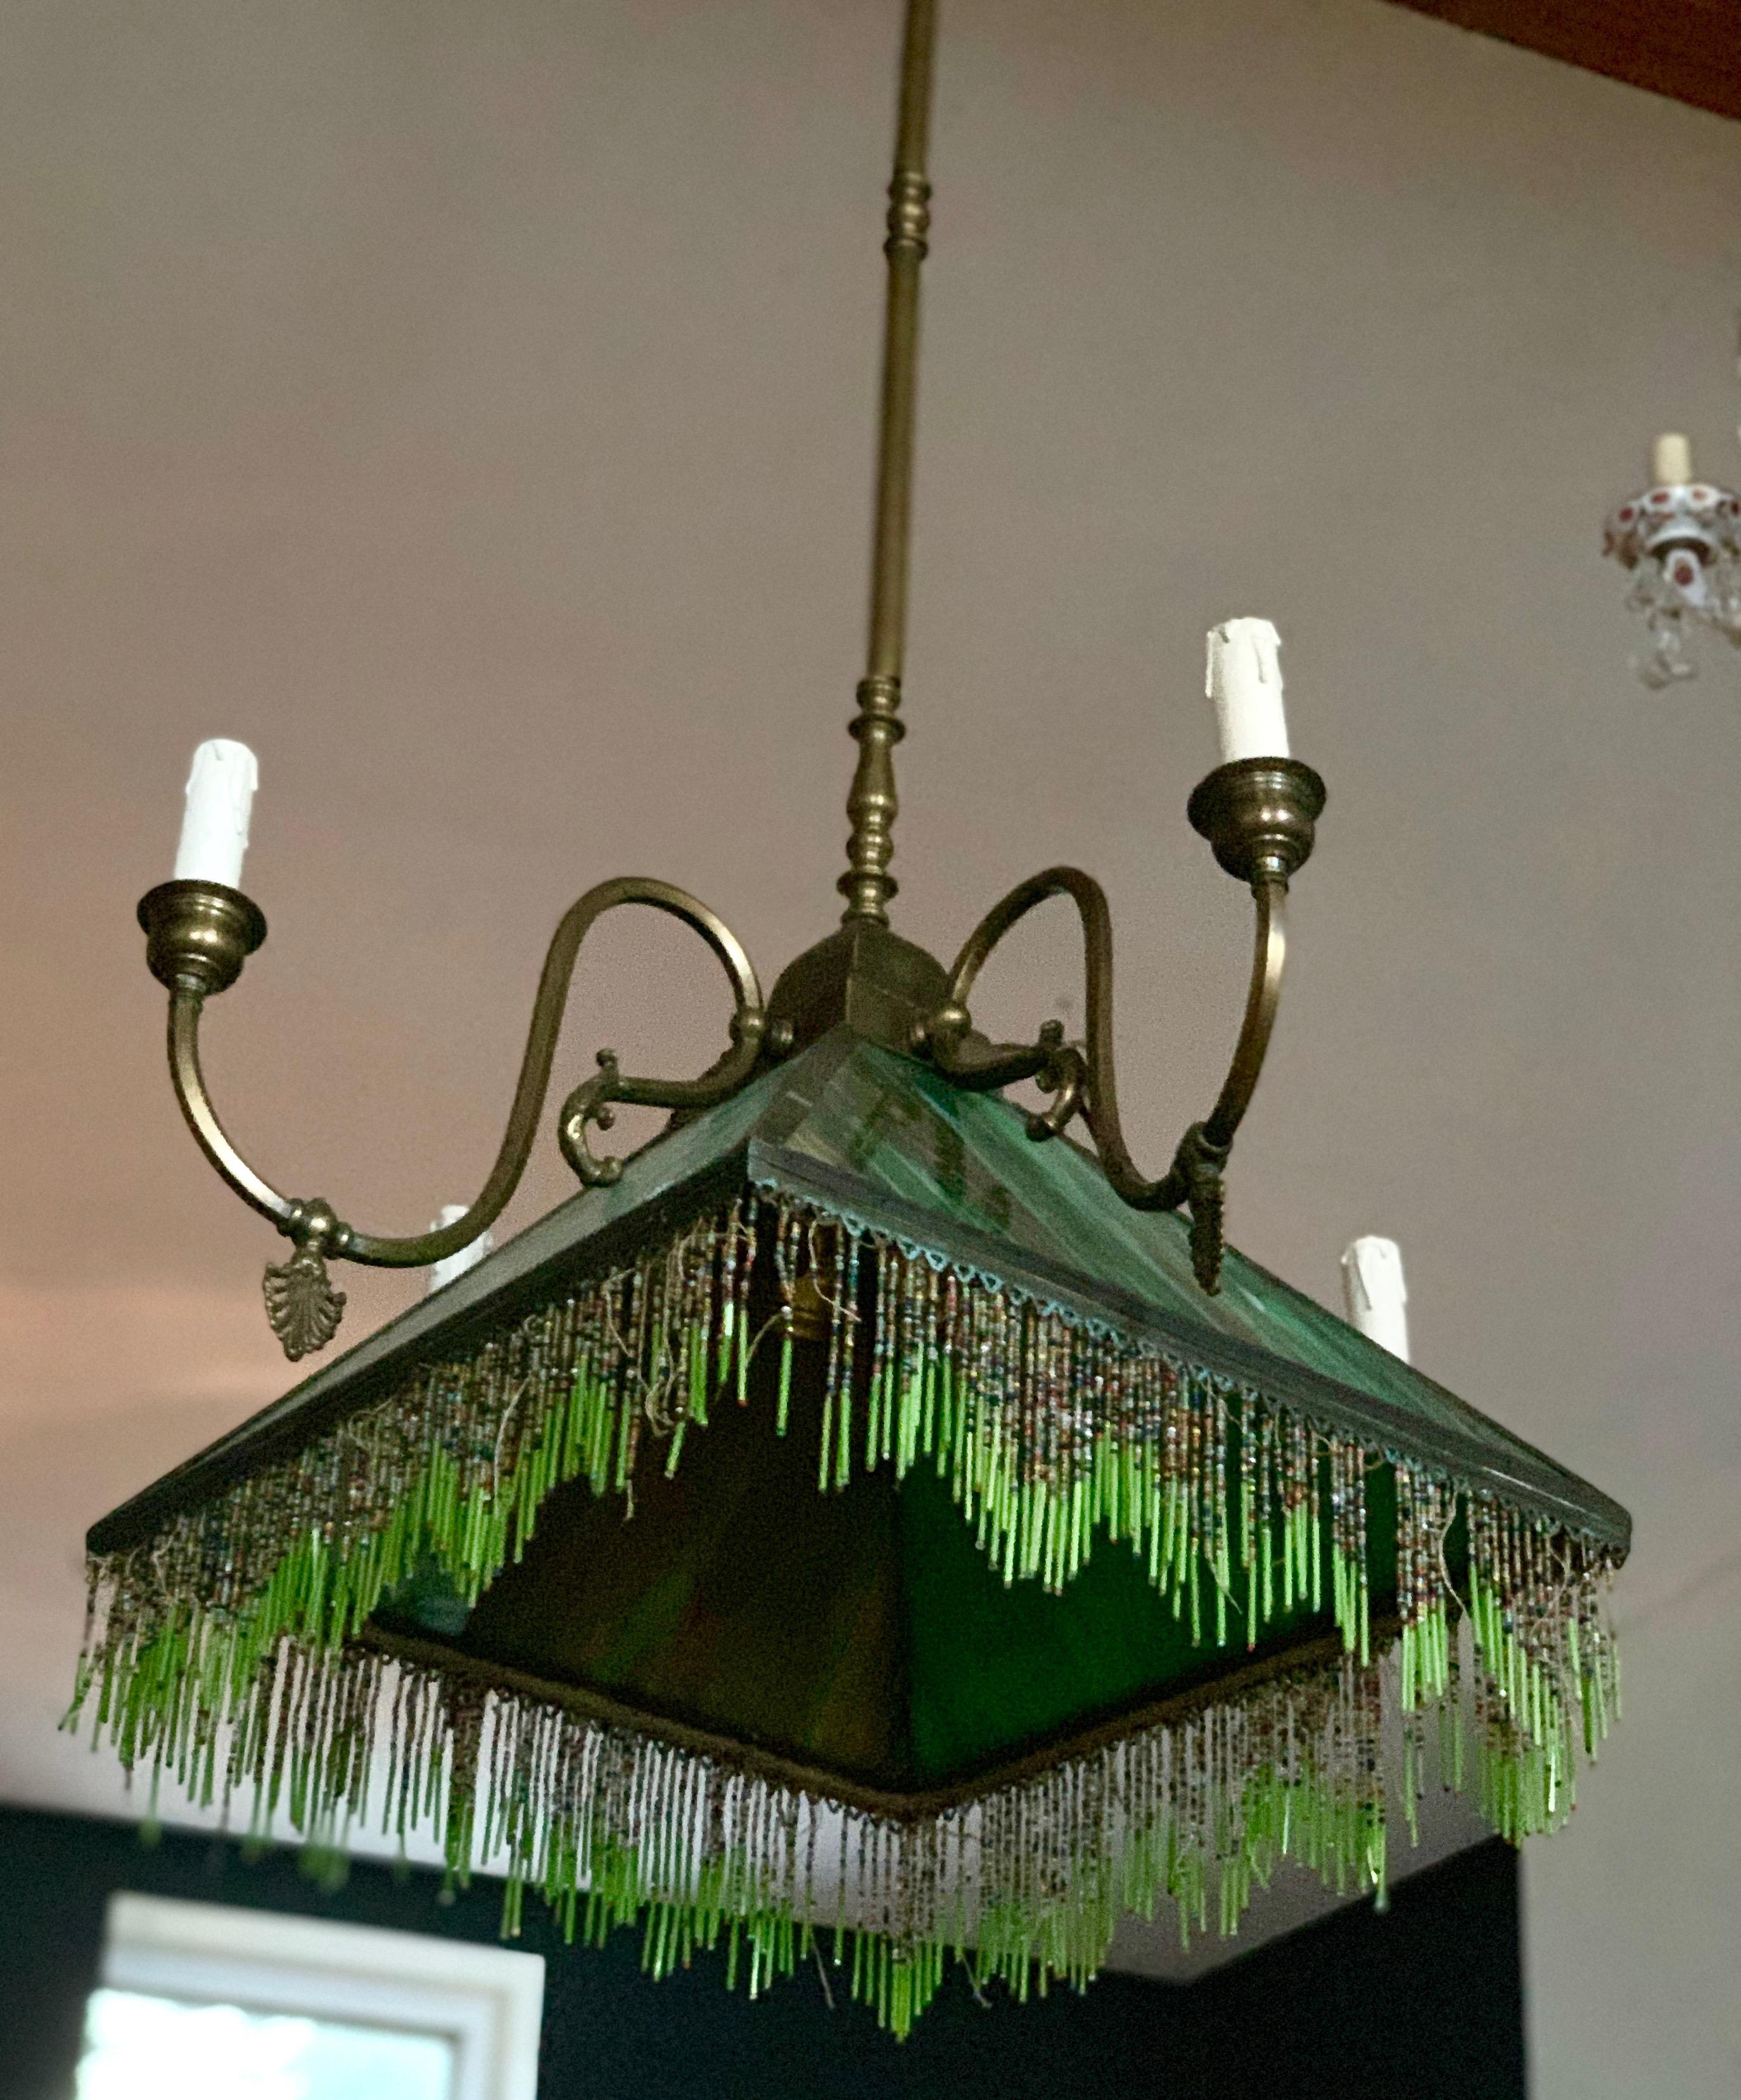 Mission slag glass light fixture, early 20th century. Beaded fringe. Dimensions: 37